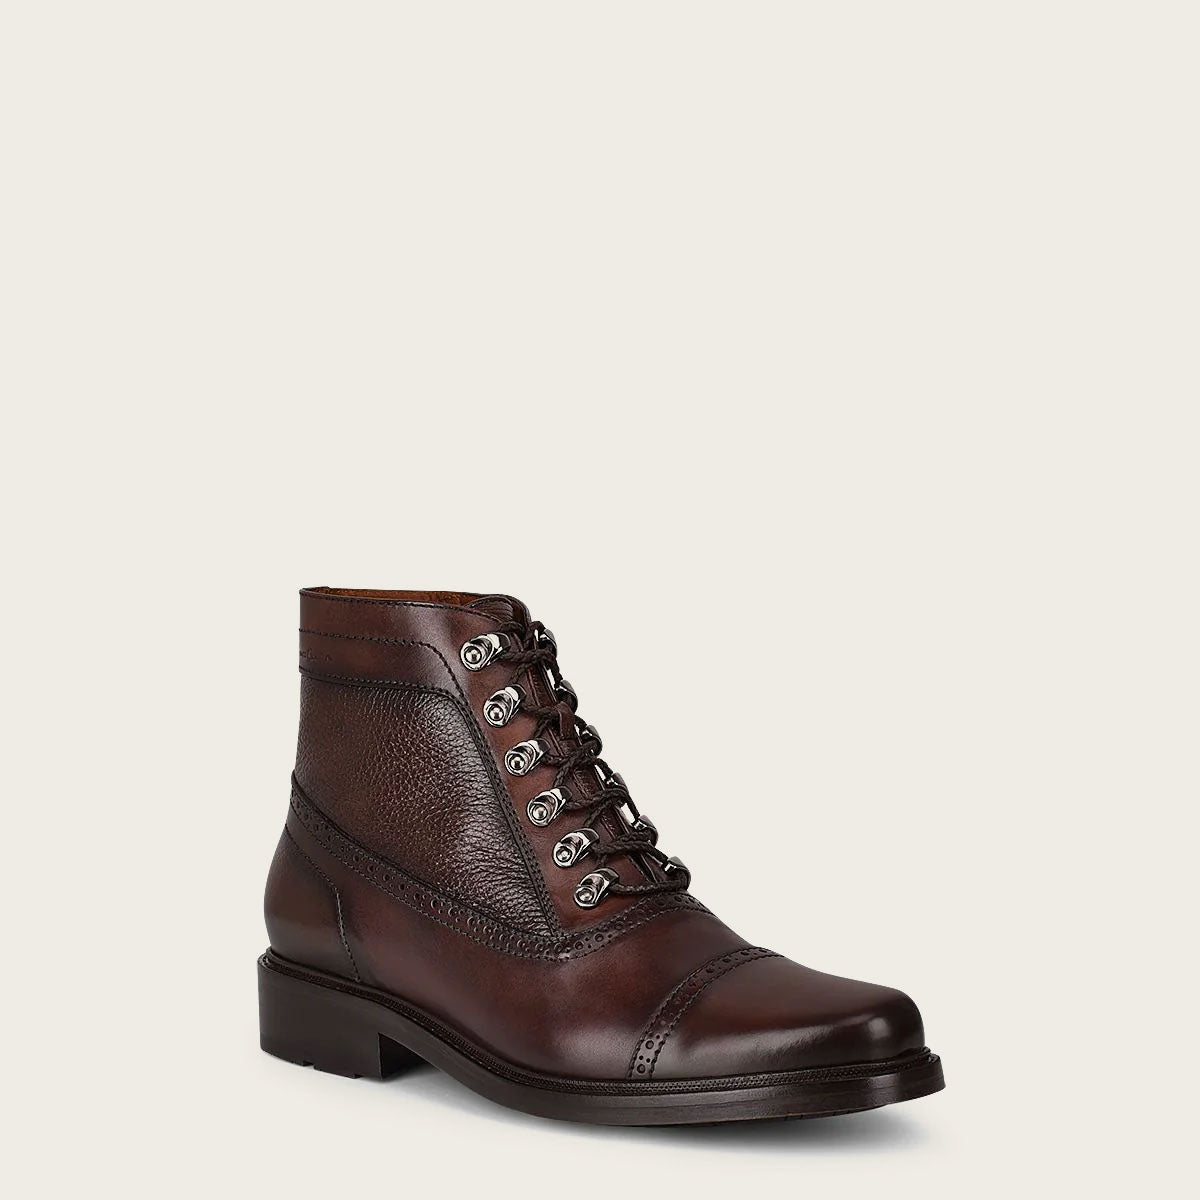 Hand-painted dark brown leather casual bootie - a stylish and unique addition to your footwear collection